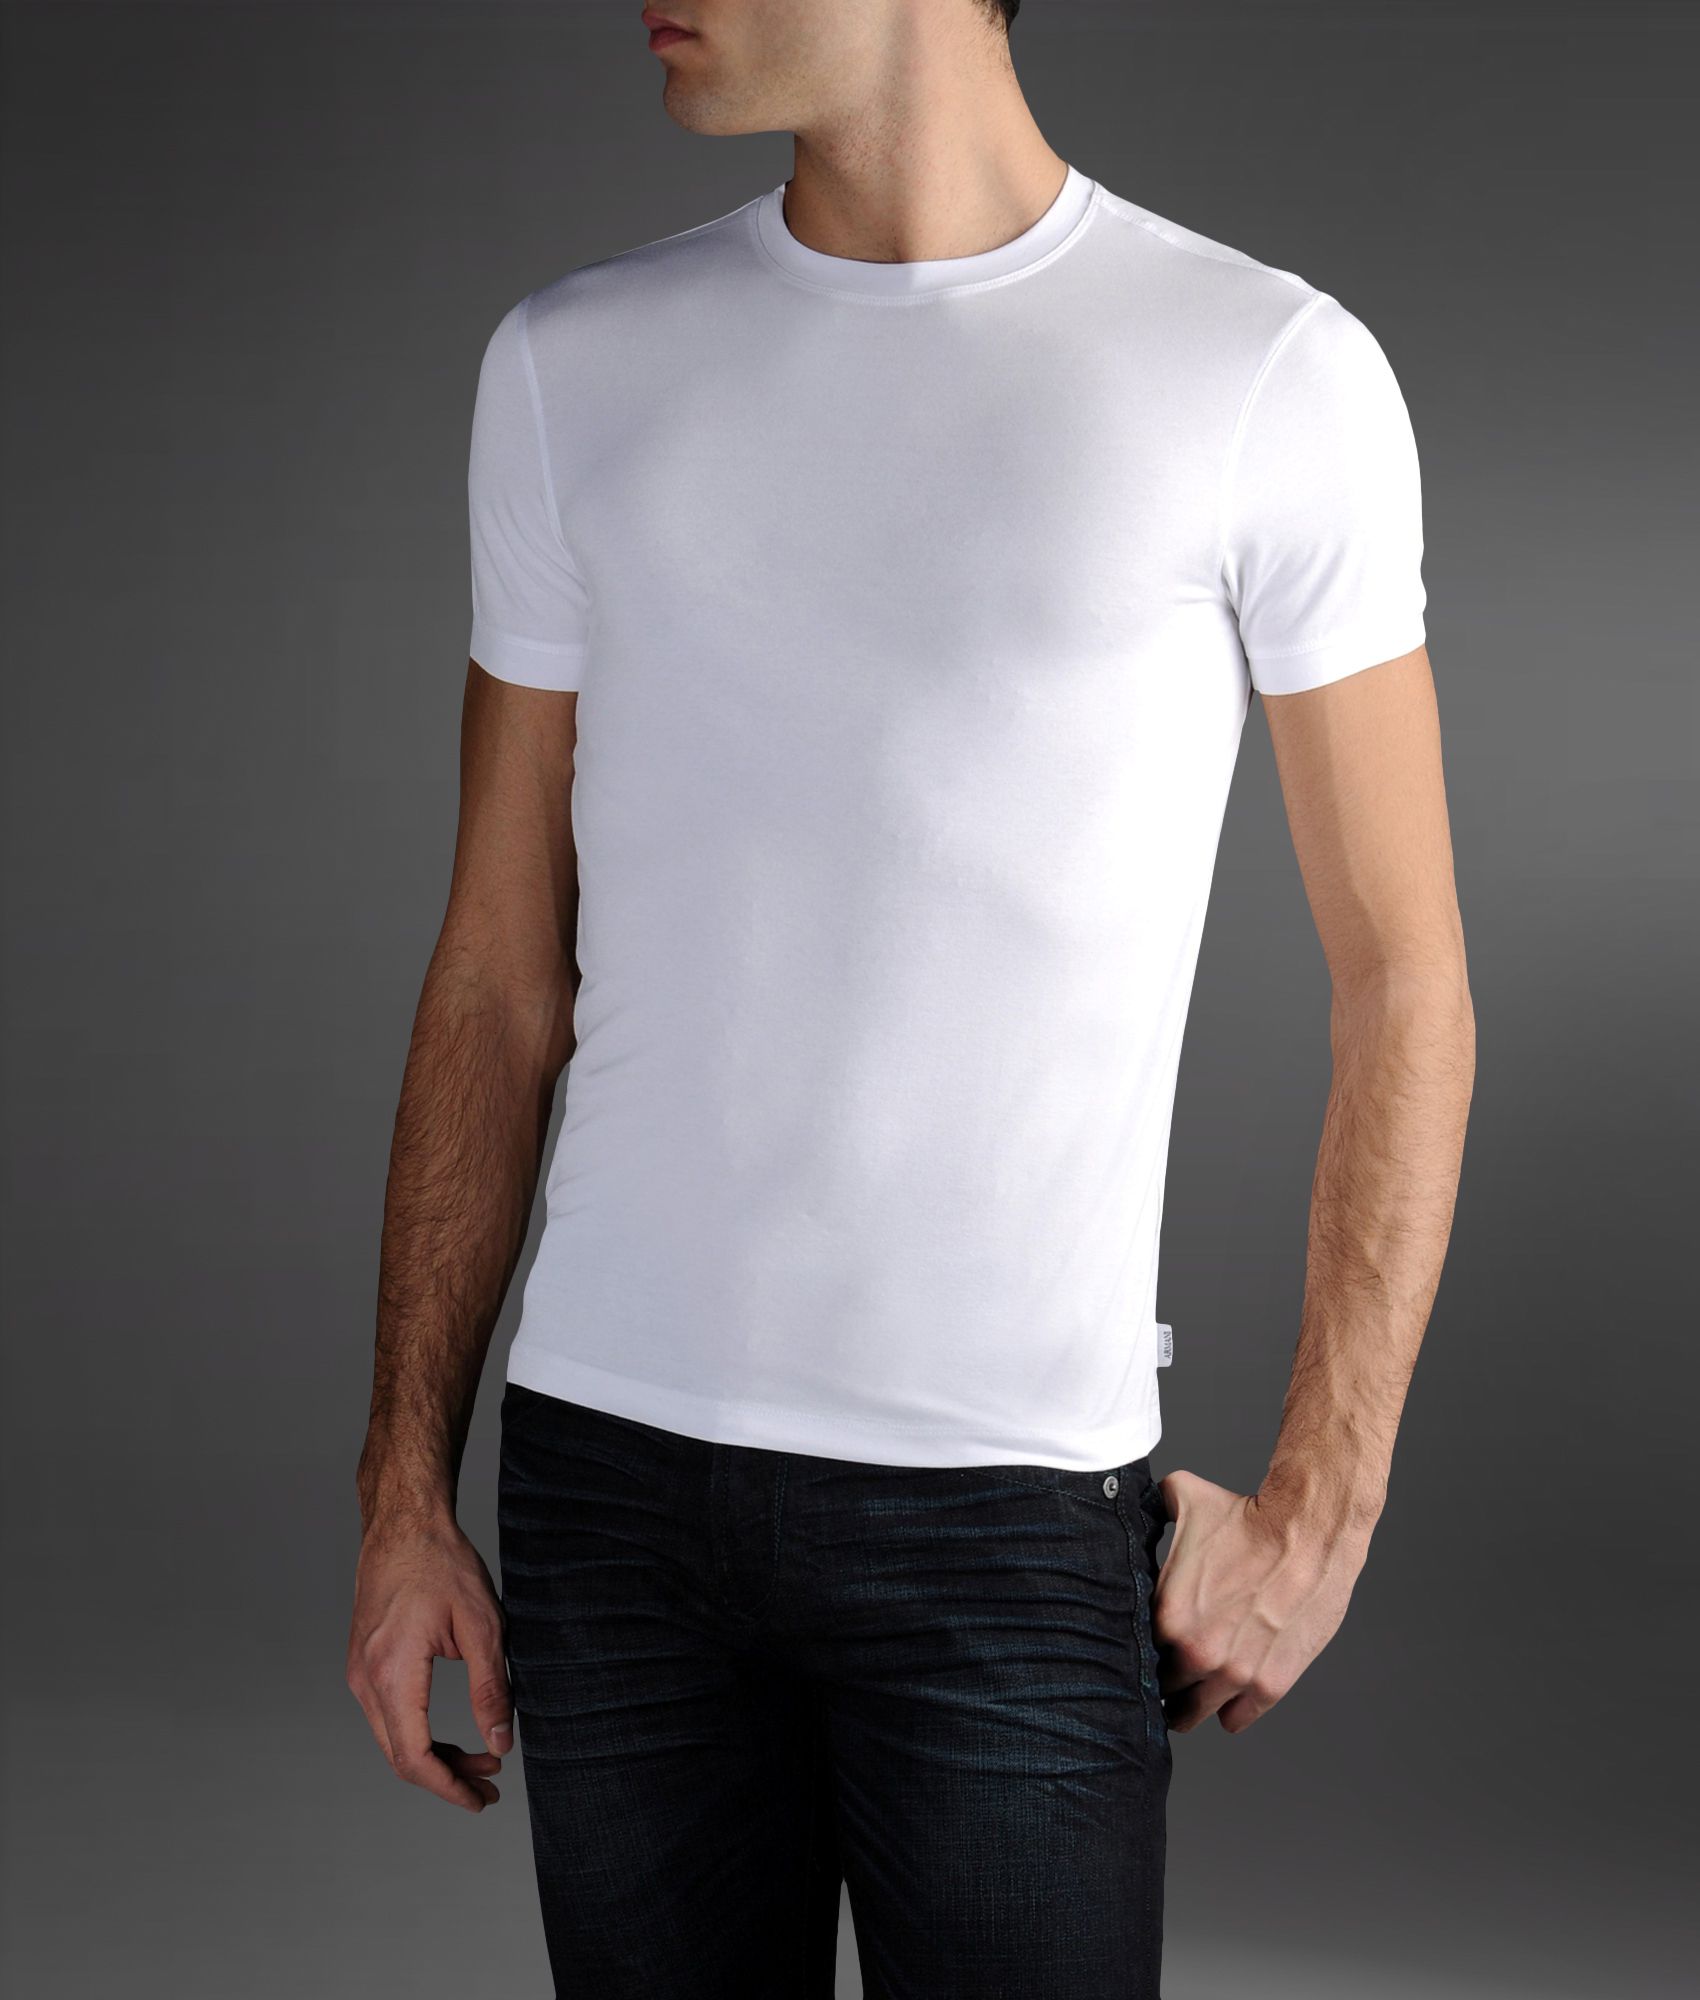 Lyst - Armani T-shirt in Shorn Stretch Viscose Fabric in White for Men